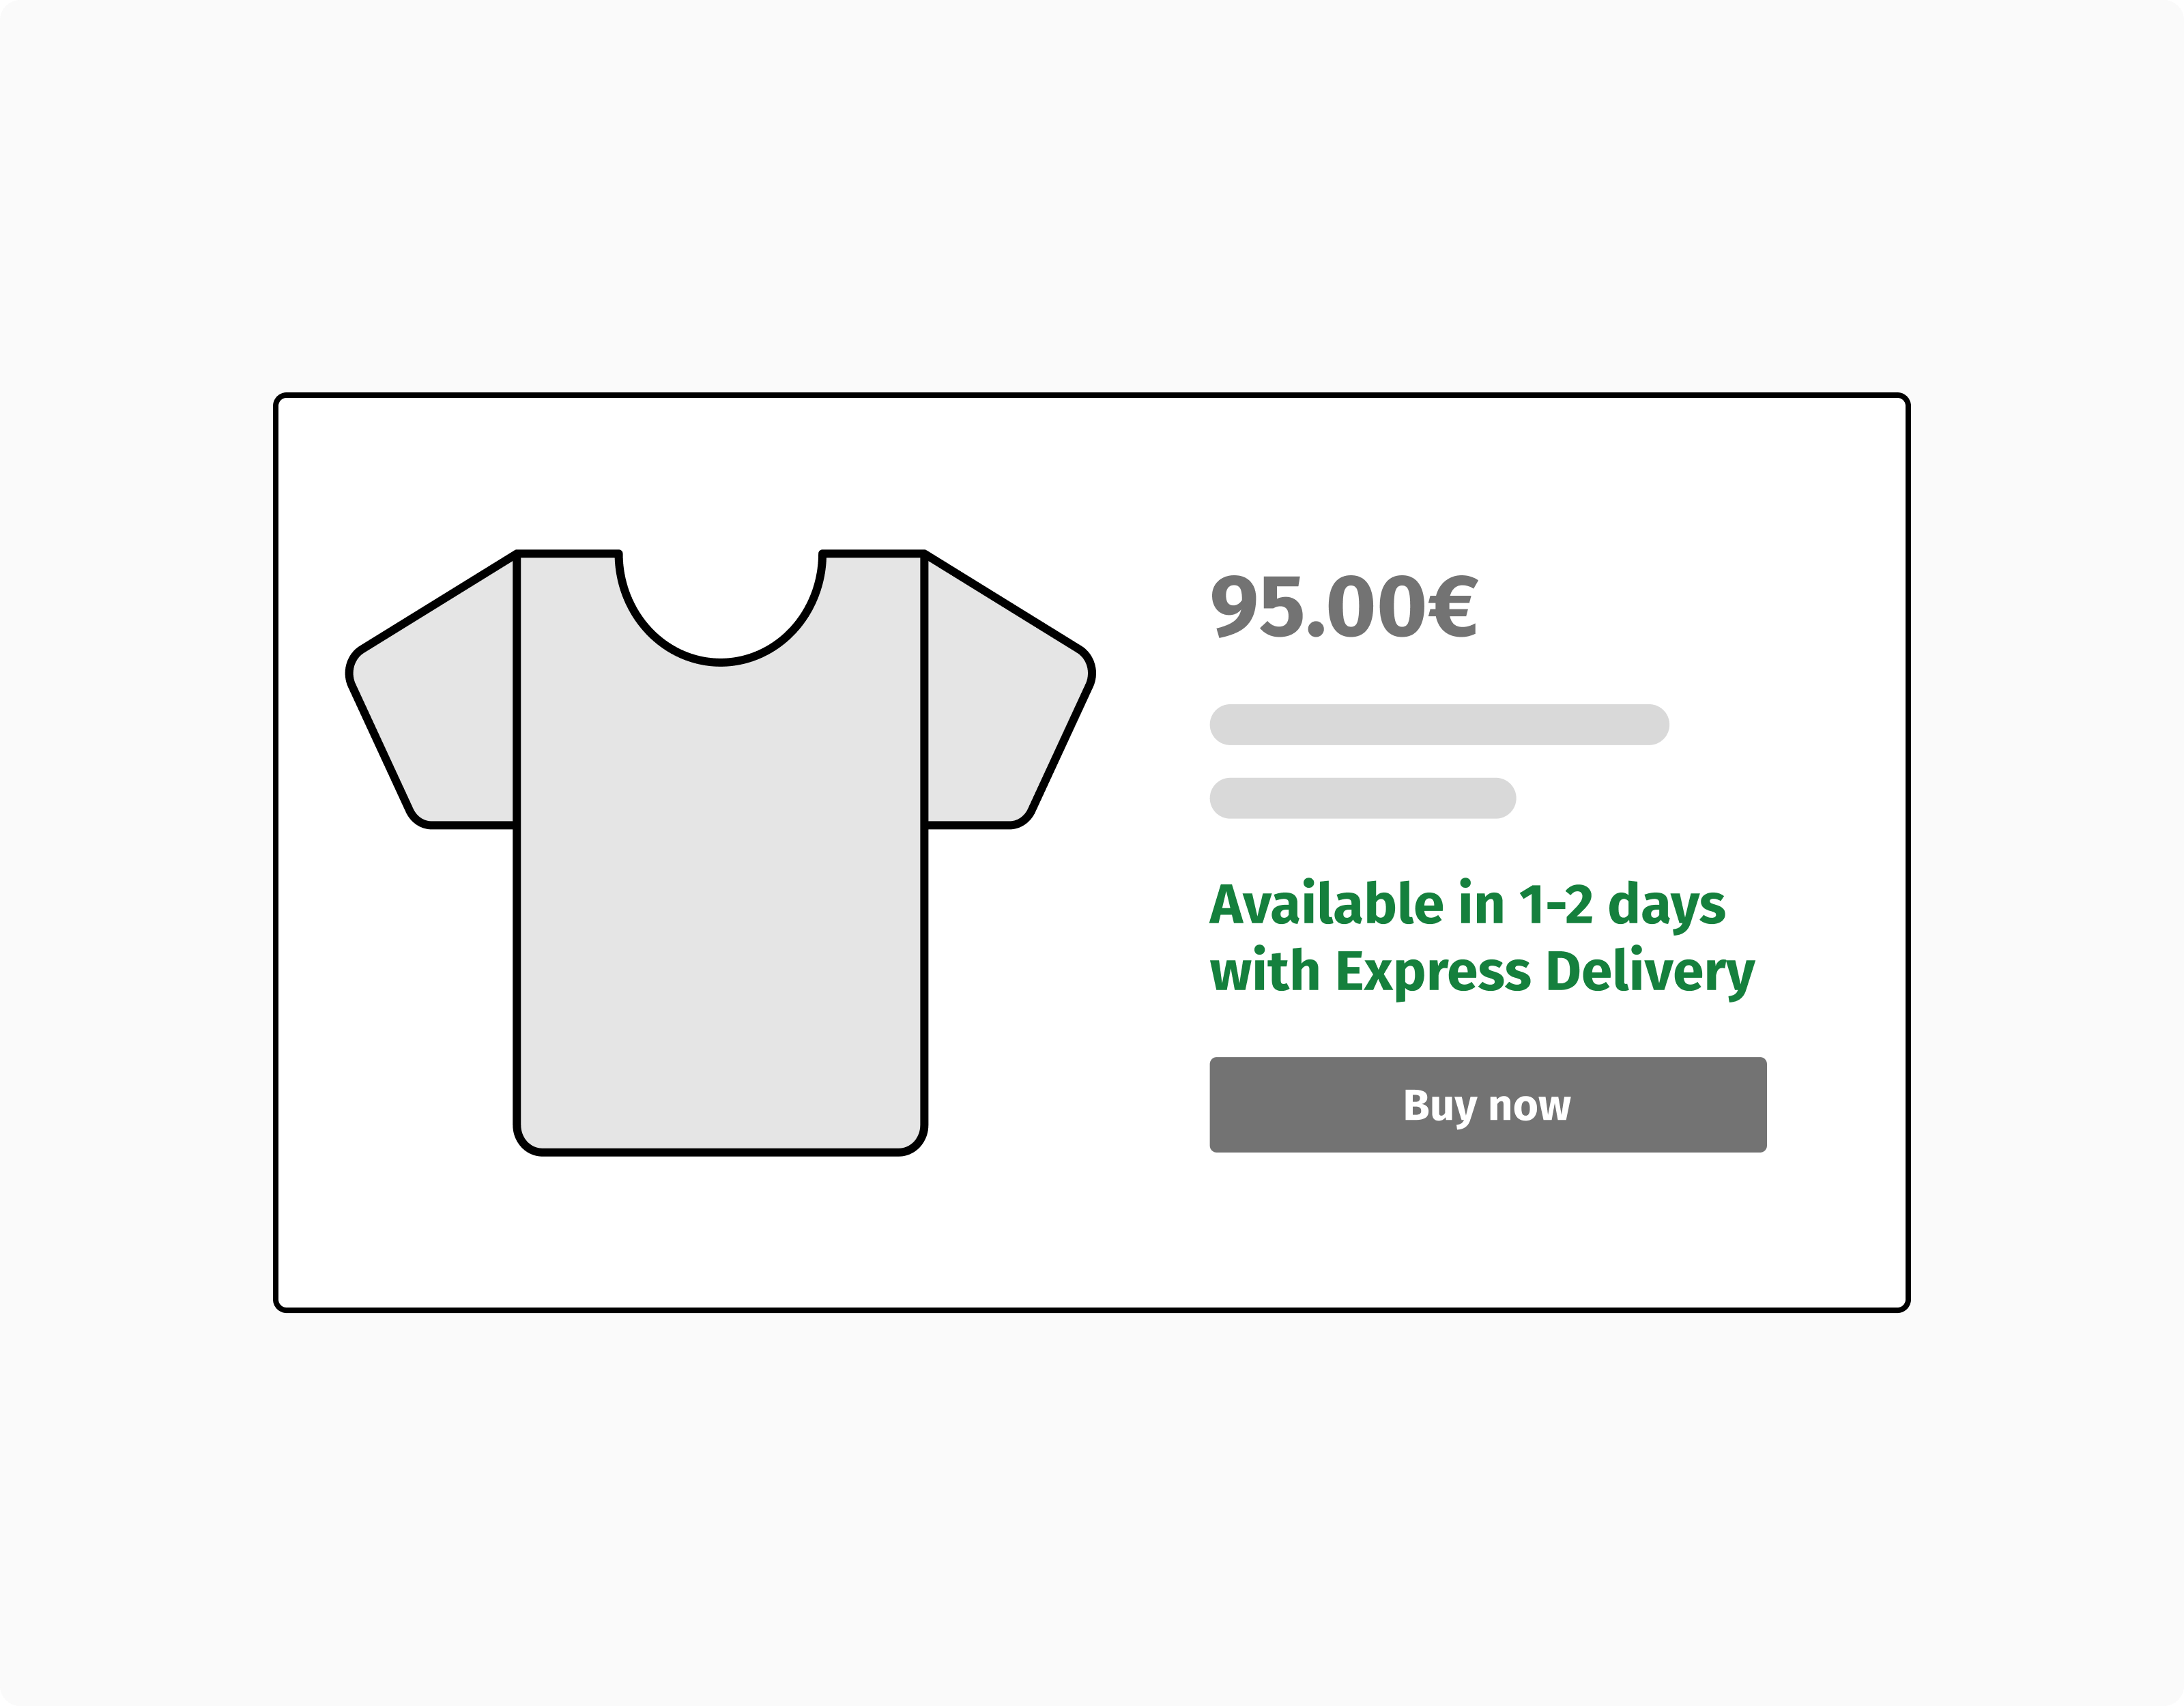 A product page that shows a message about availability.